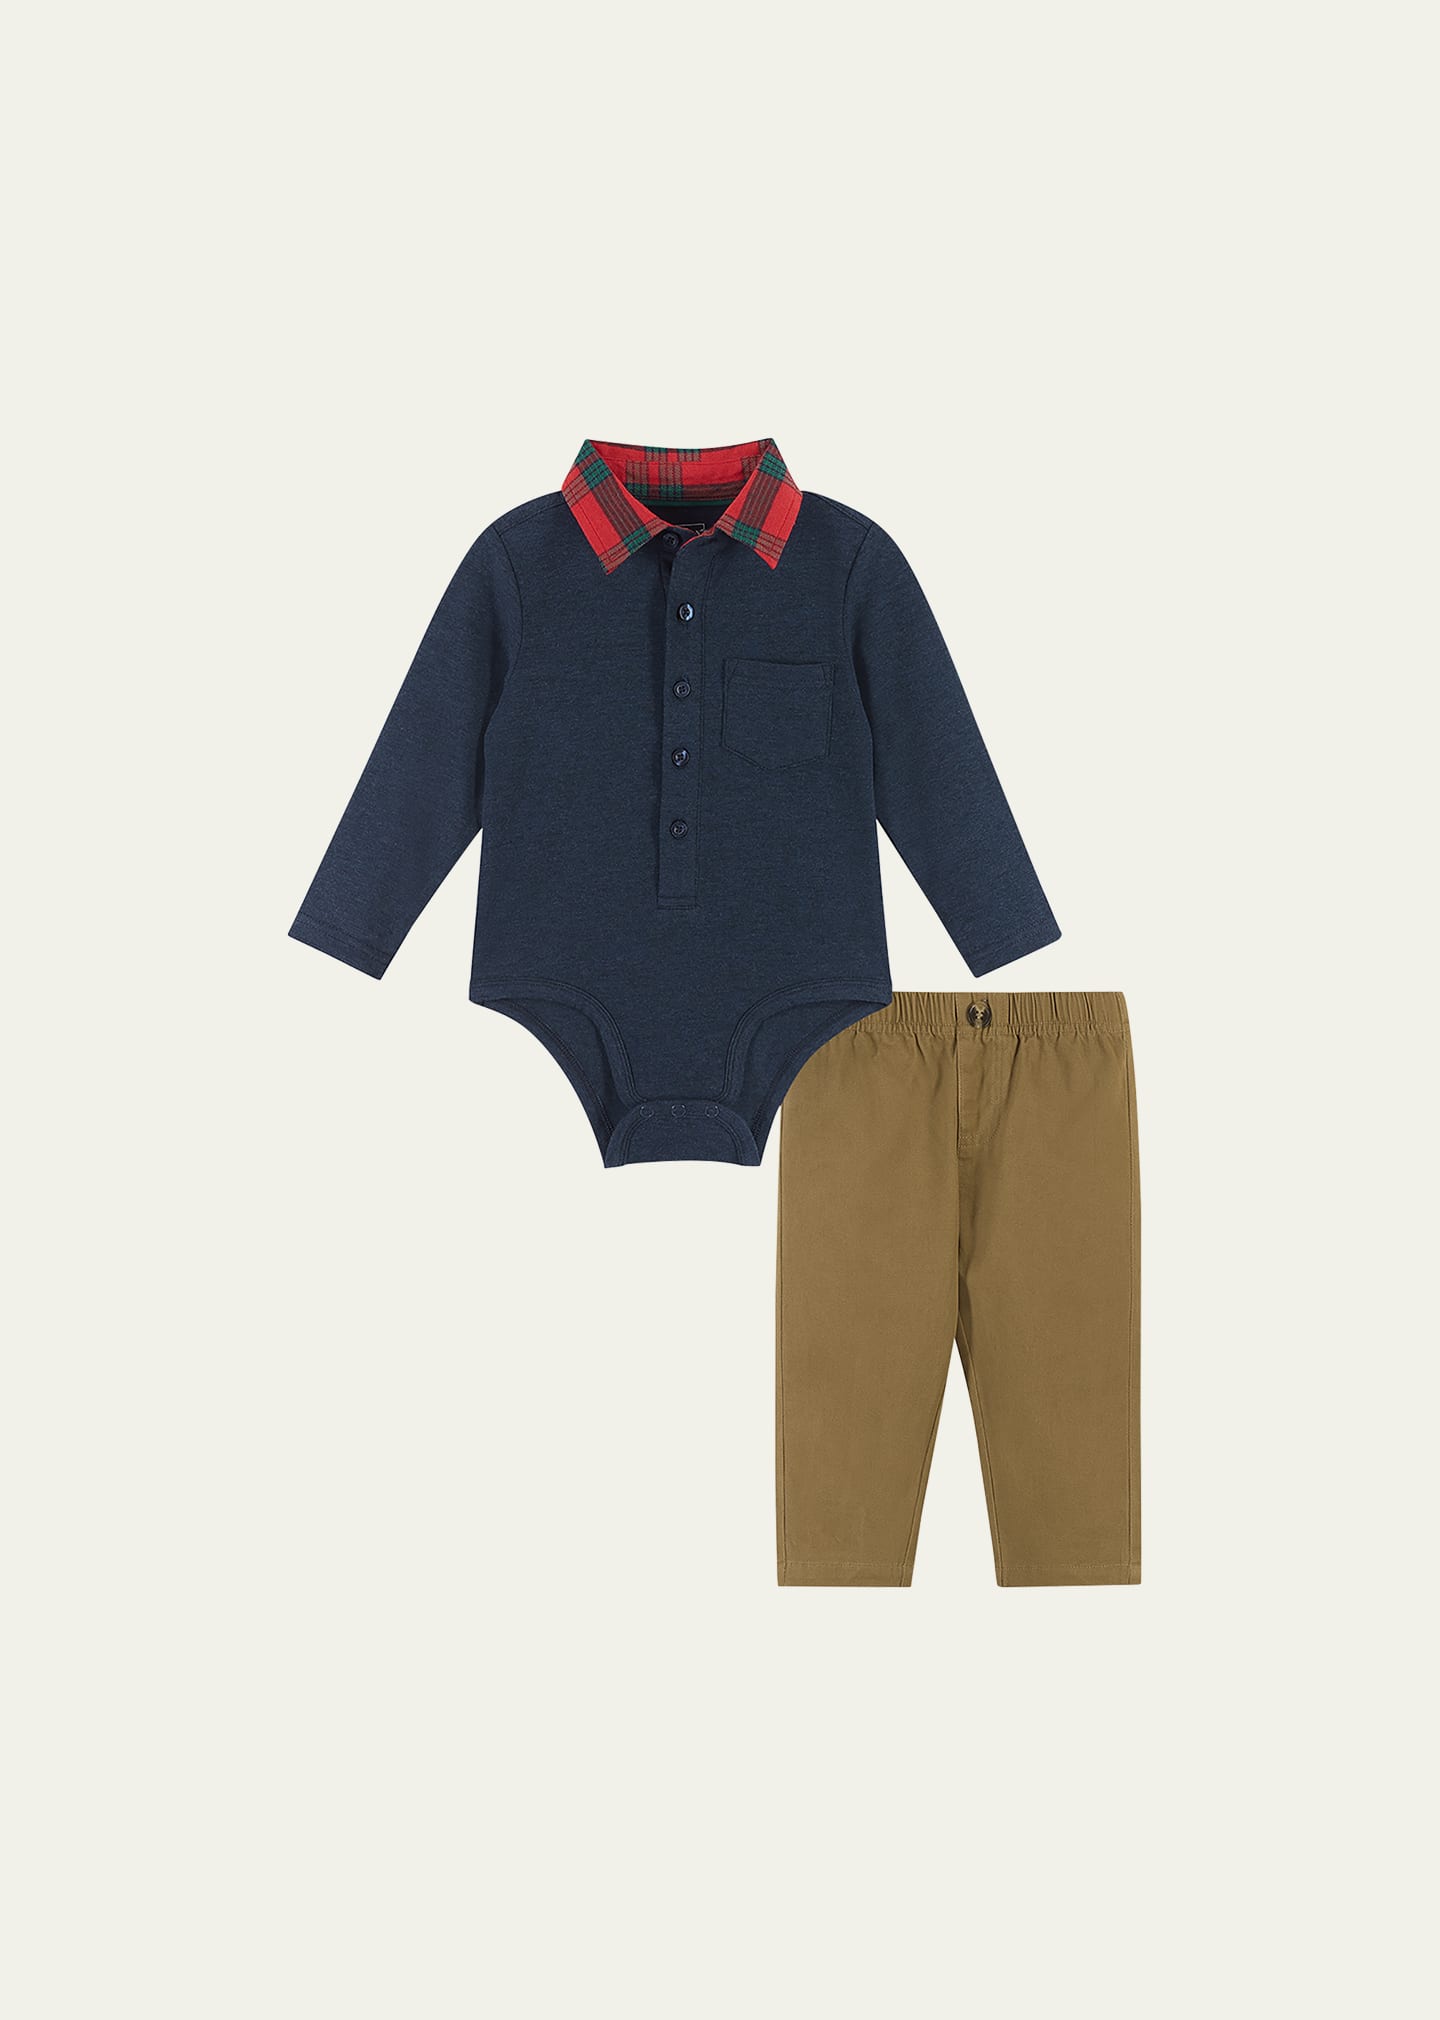 Andy & Evan Kids' Boy's Holiday Polo Bodysuit W/ Pants Set In Navy